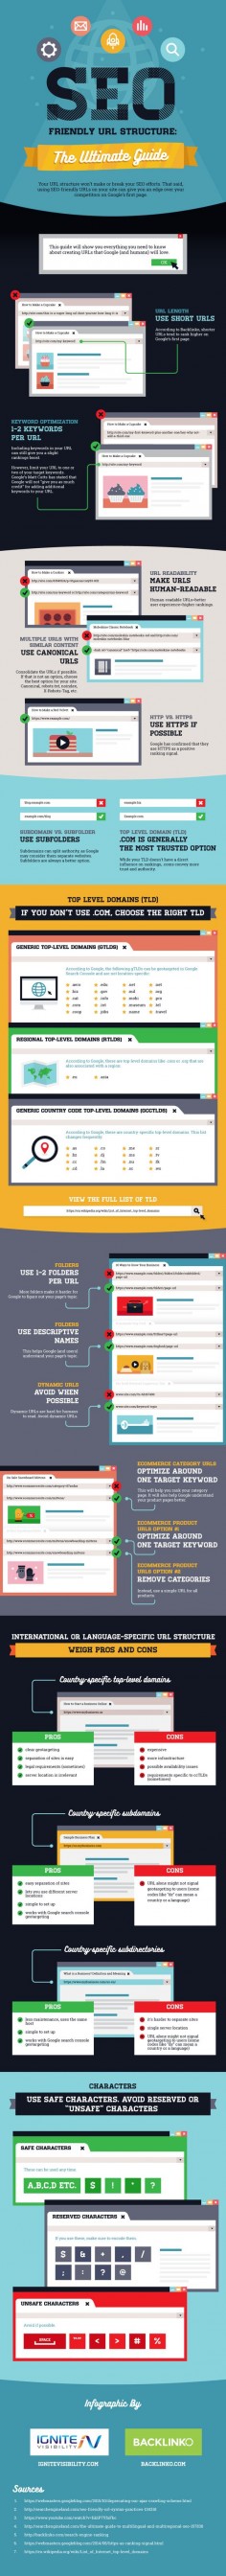 #SEO #Marketing - The ultimate guide to SEO-friendly URLs